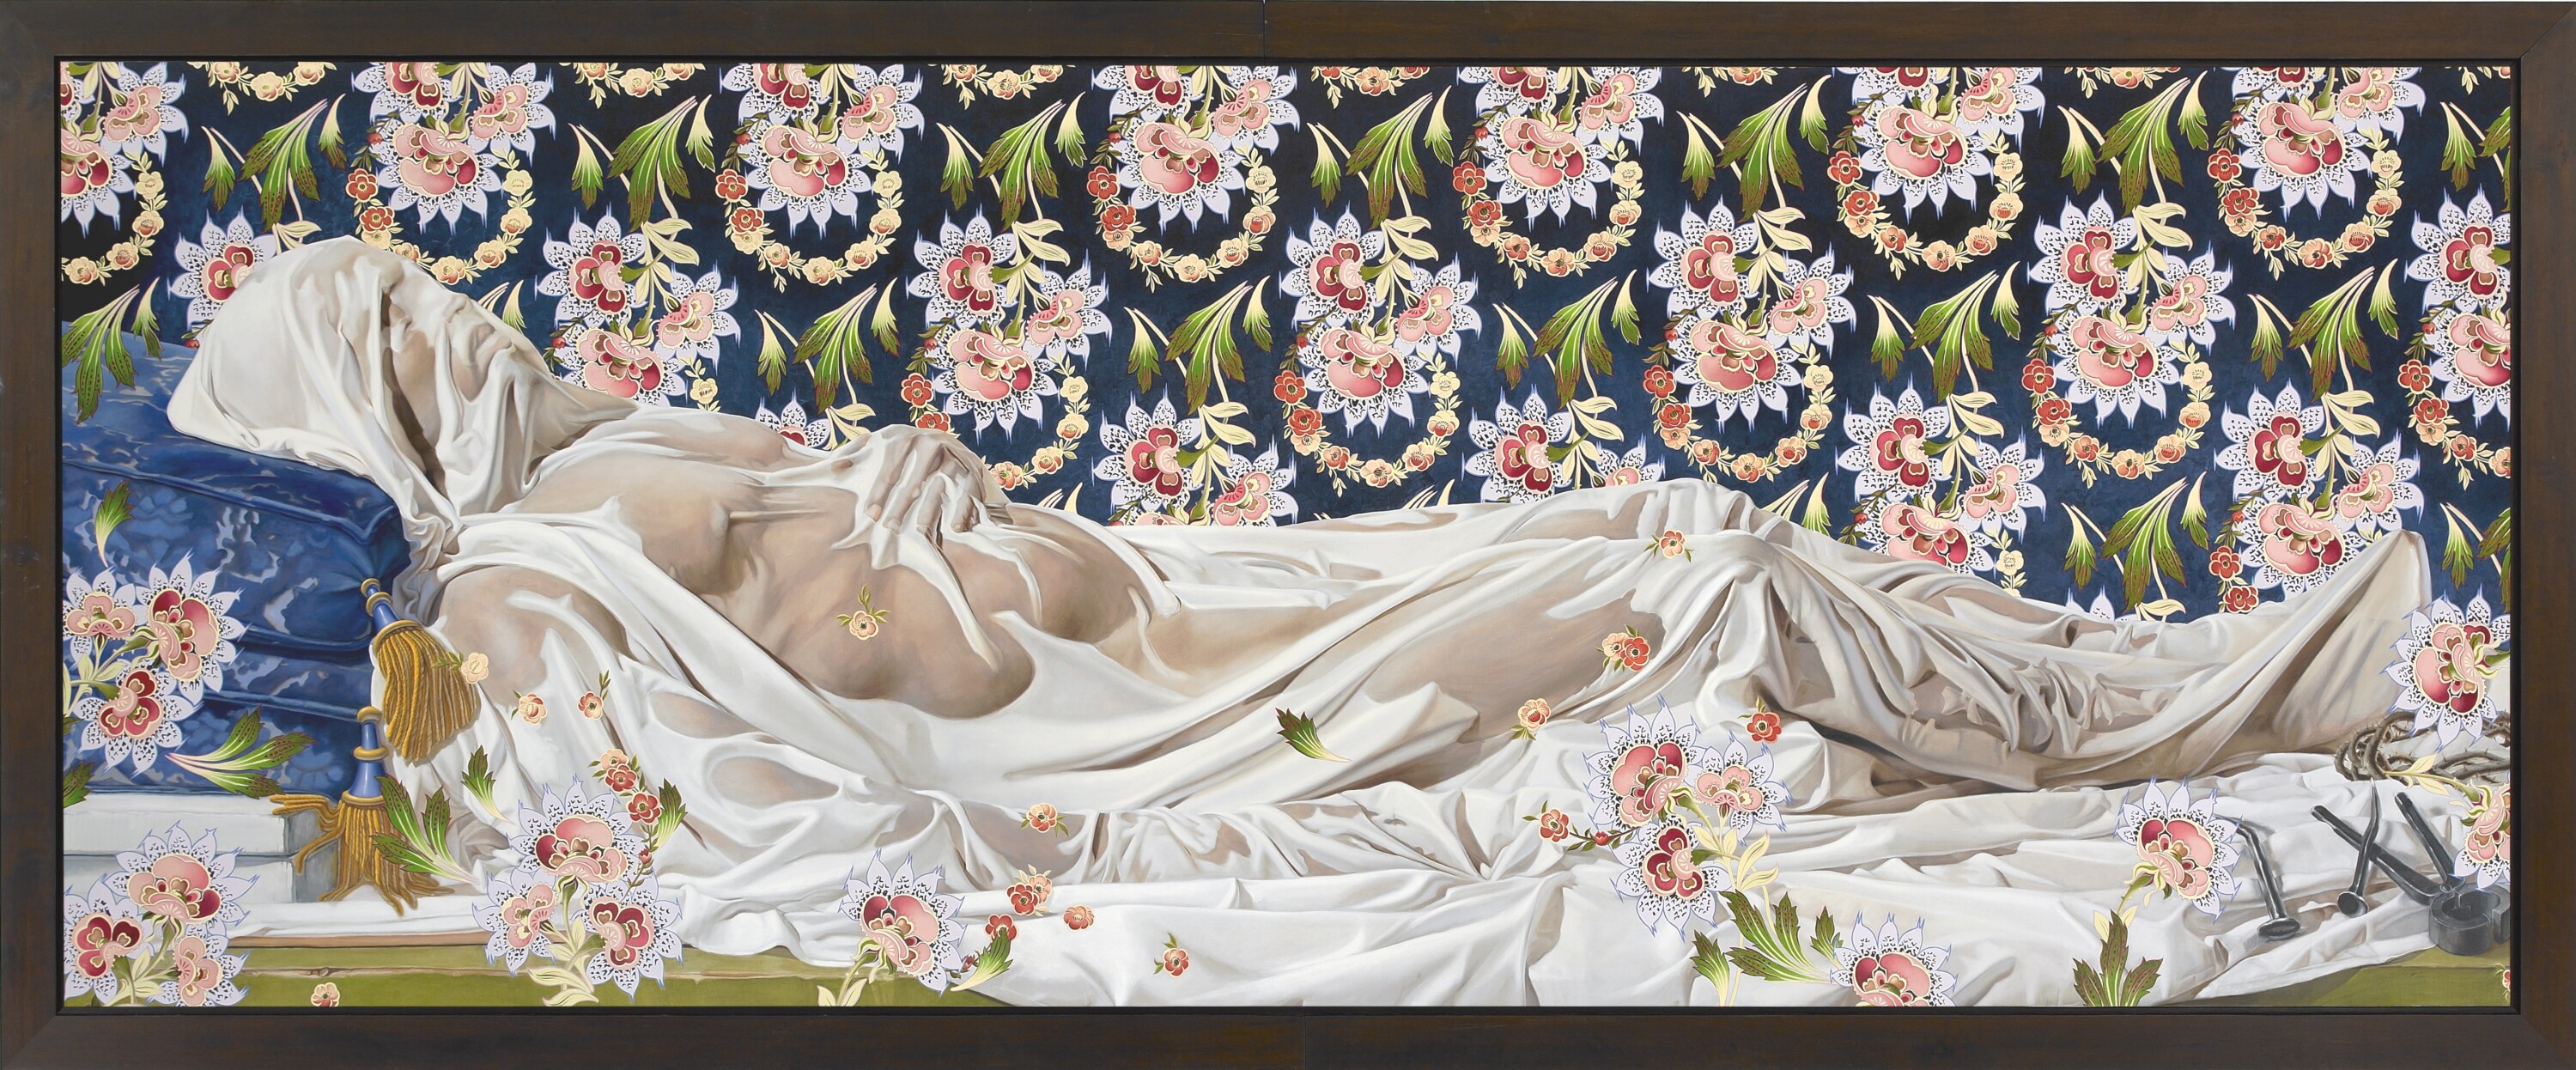 kehindewiley_a new republic_The Veiled Christ